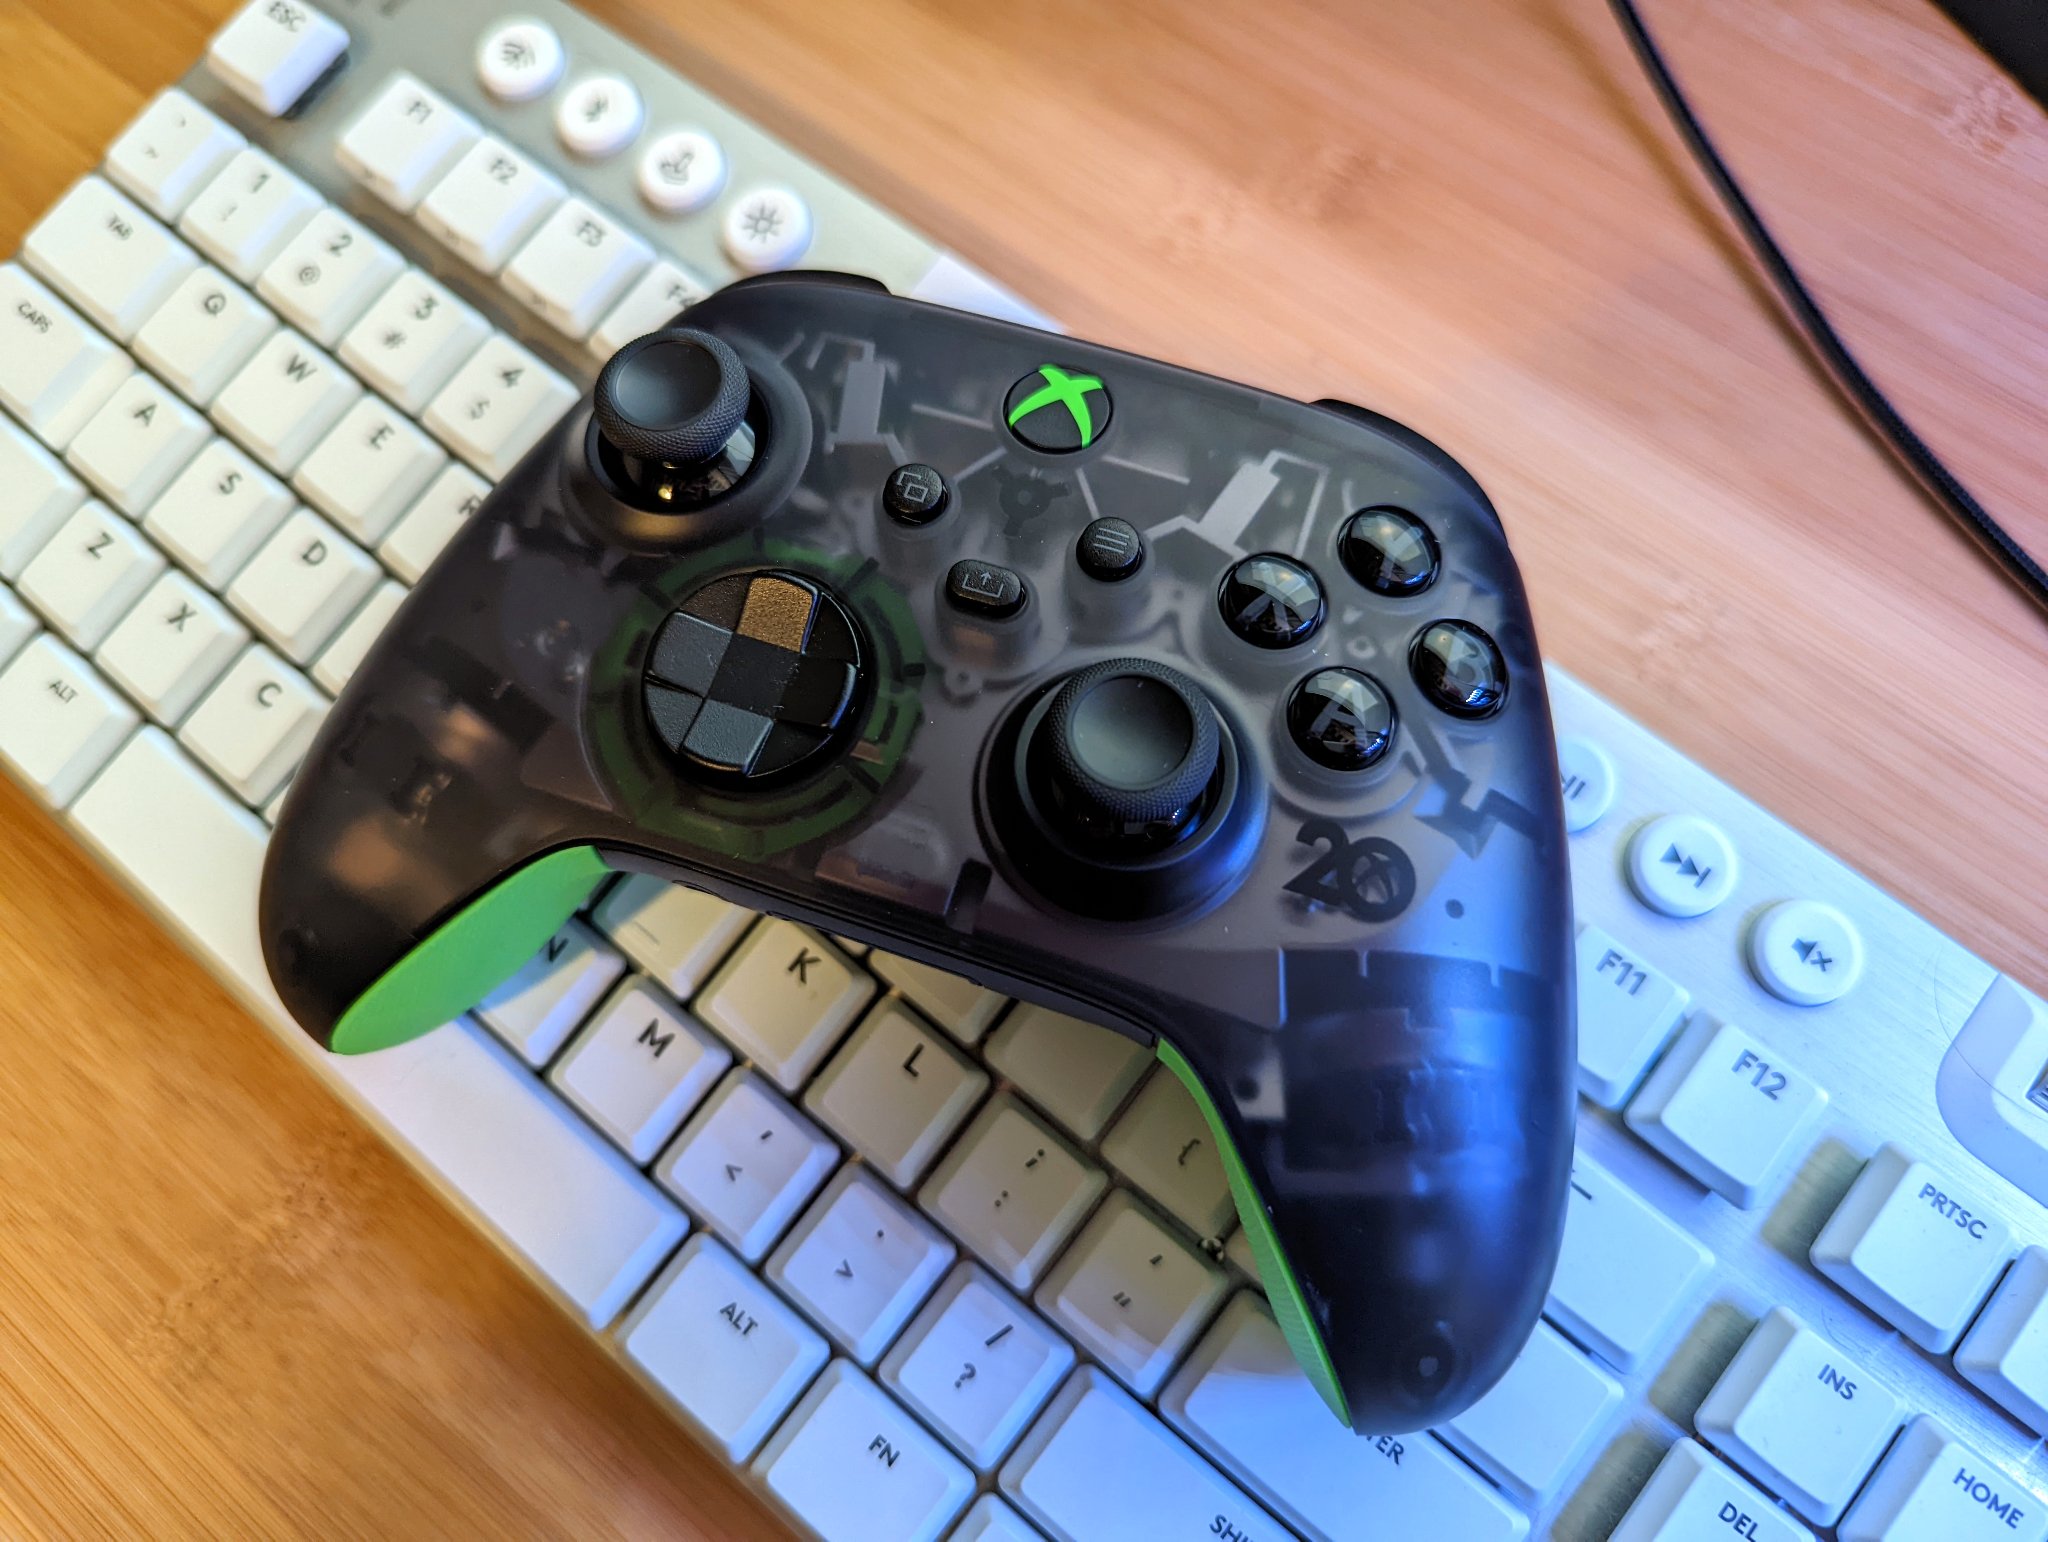 Xbox 20th Anniversary Controller sitting on top of keyboard